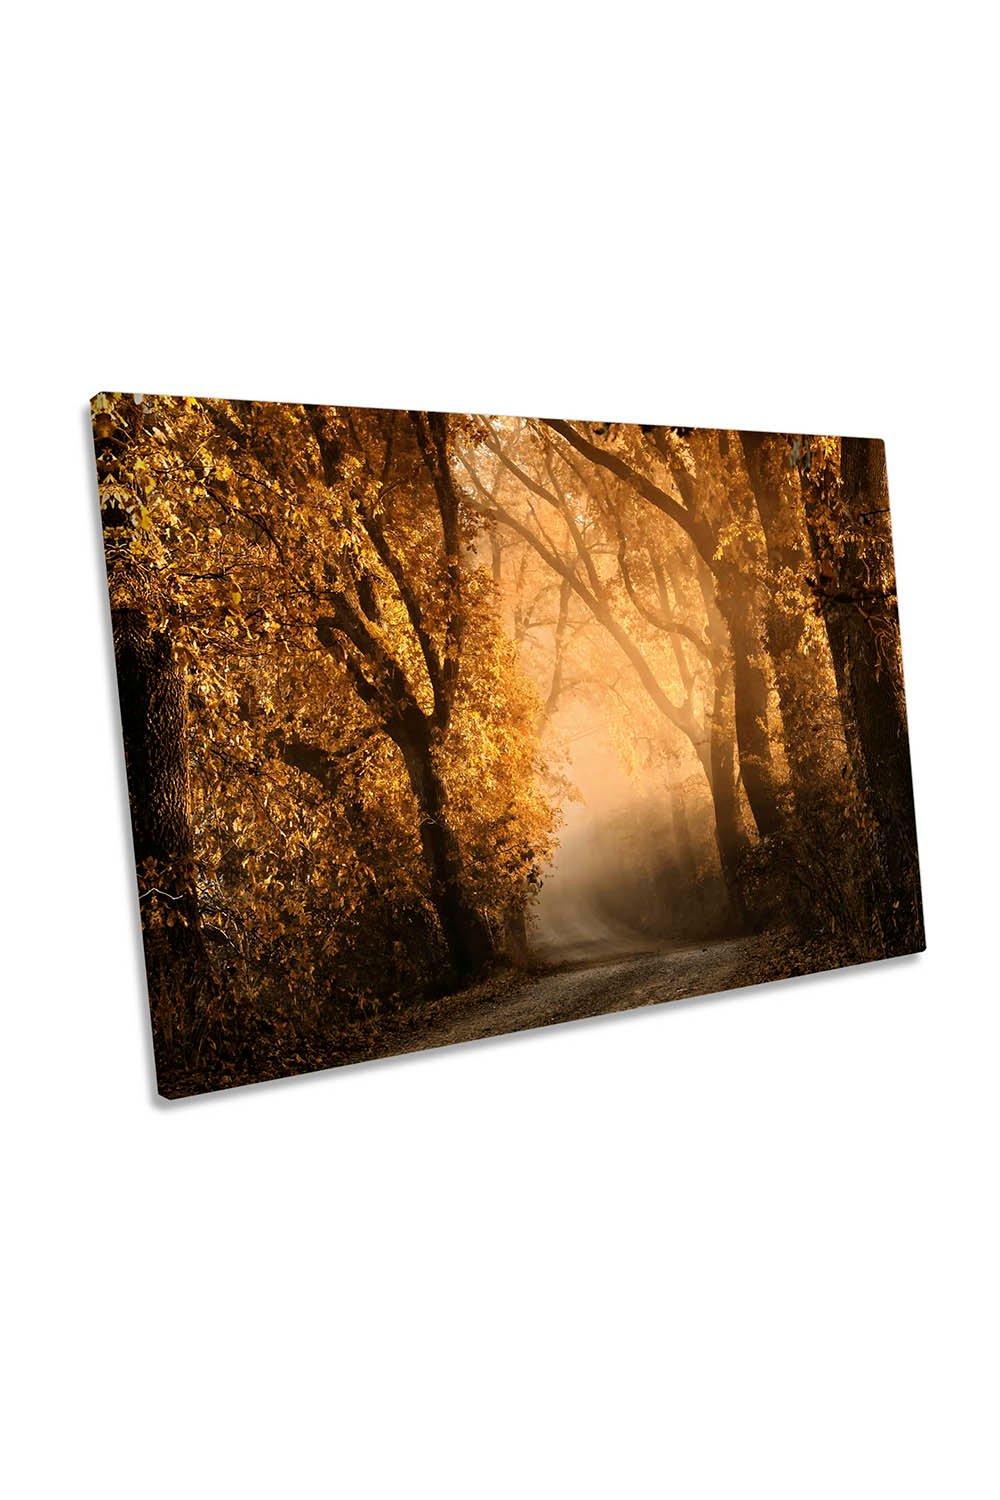 Tuscany Autumn Sunset Countryside Road Canvas Wall Art Picture Print